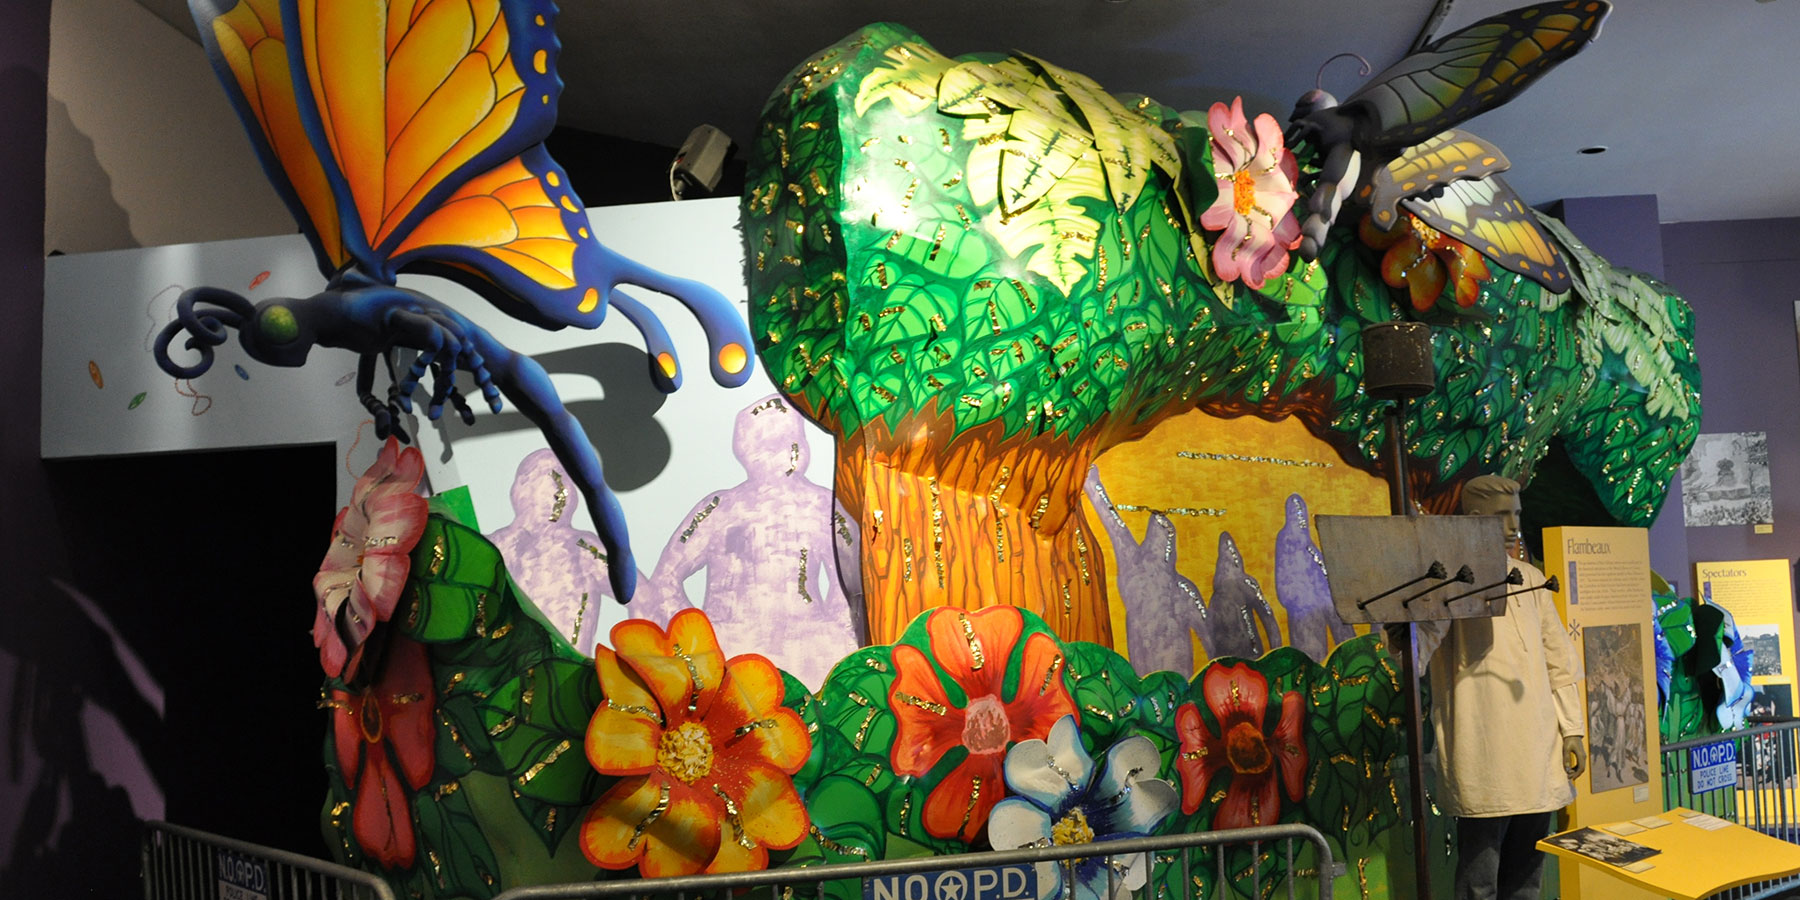 Mardi Gras float on display at the Louisiana State Museum in New Orleans